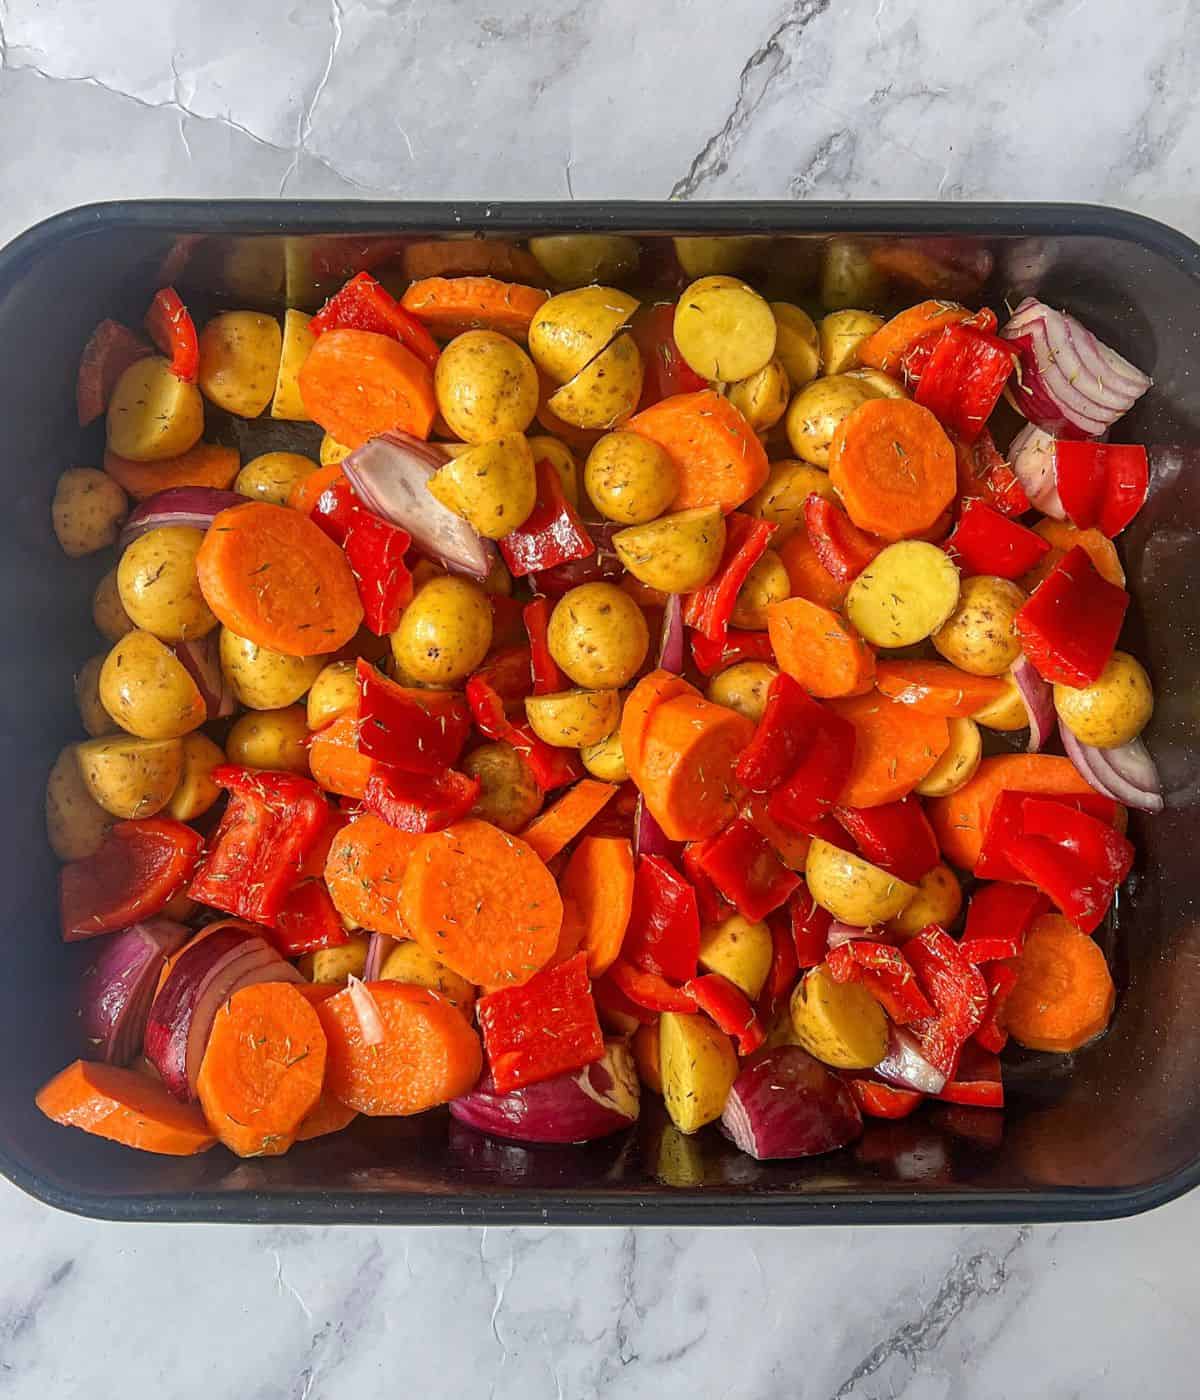 Raw potatoes, red onion, red peppers and carrots in a roasting tin.